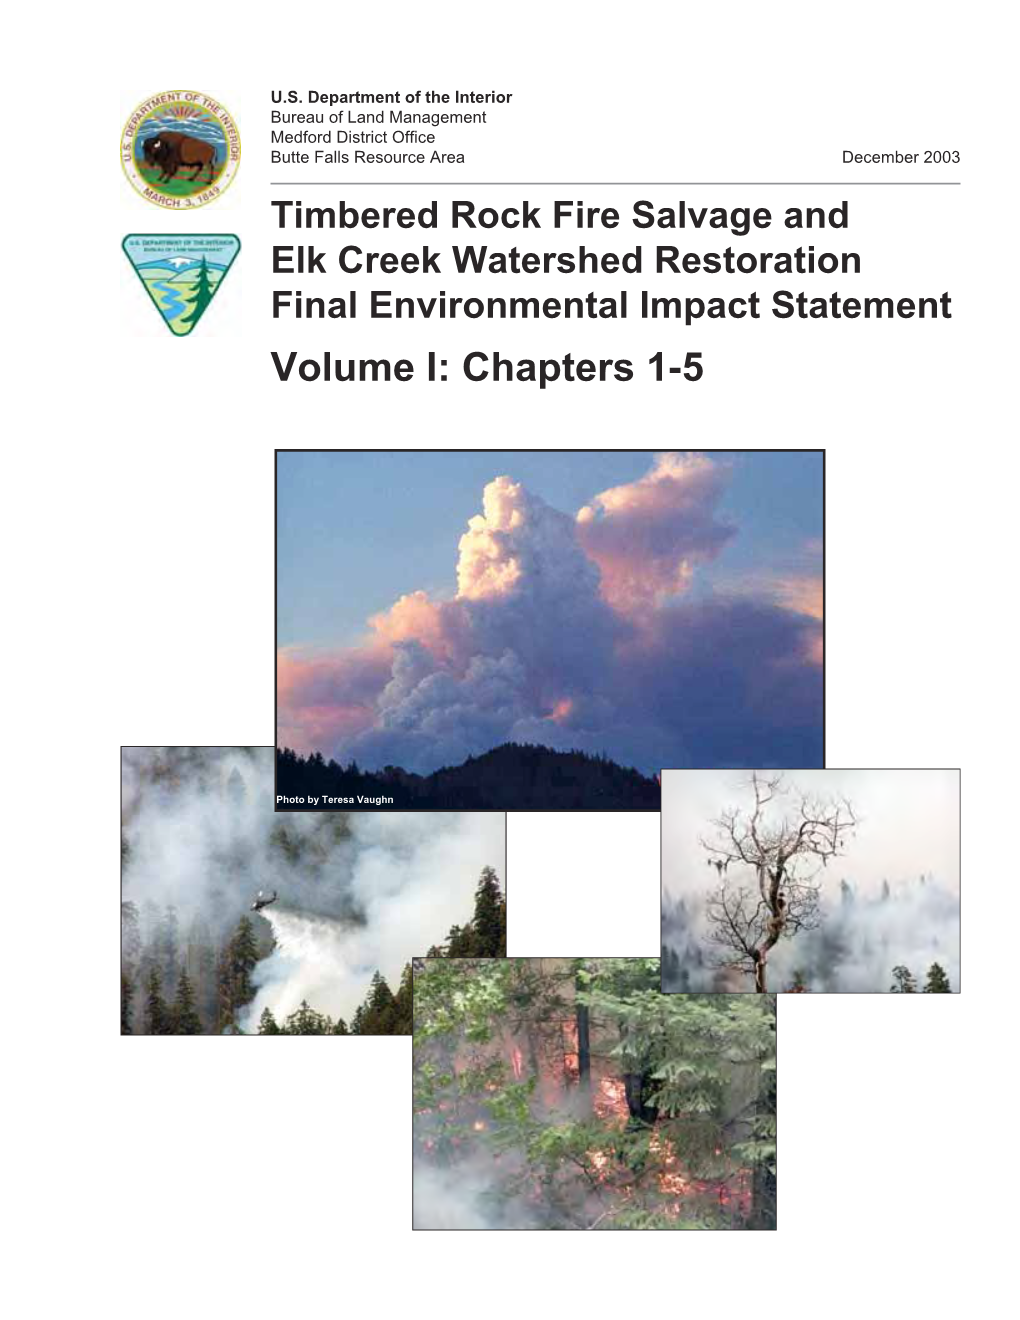 Timbered Rock Fire Salvage and Elk Creek Watershed Restoration Final Environmental Impact Statement Volume I: Chapters 1-5